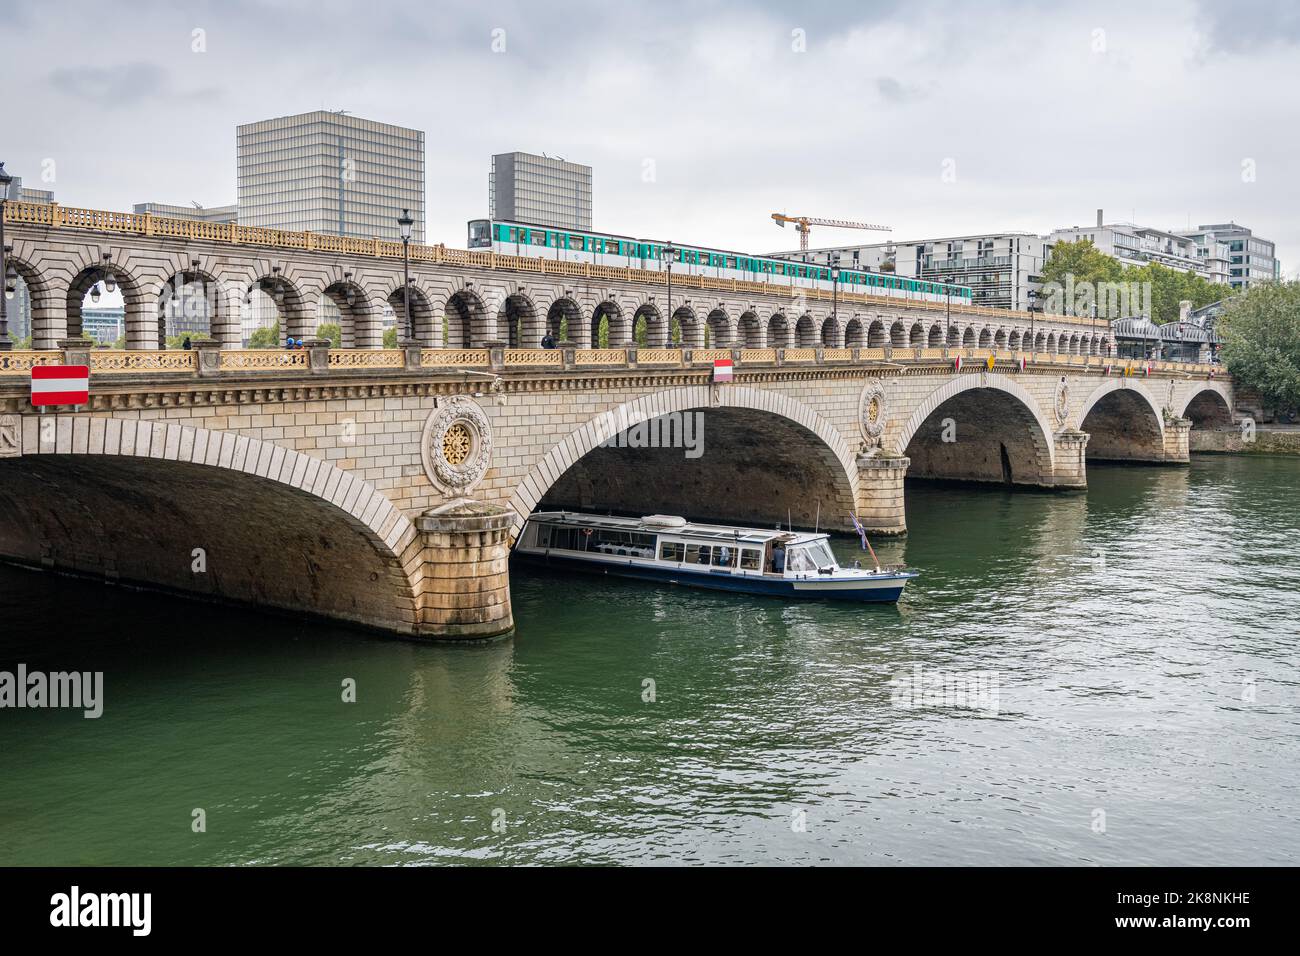 Pont de Bercy combined Road and Rail Bridge across River Seine with a train crossing and a boat emerging from under the bridge, Paris, France Stock Photo